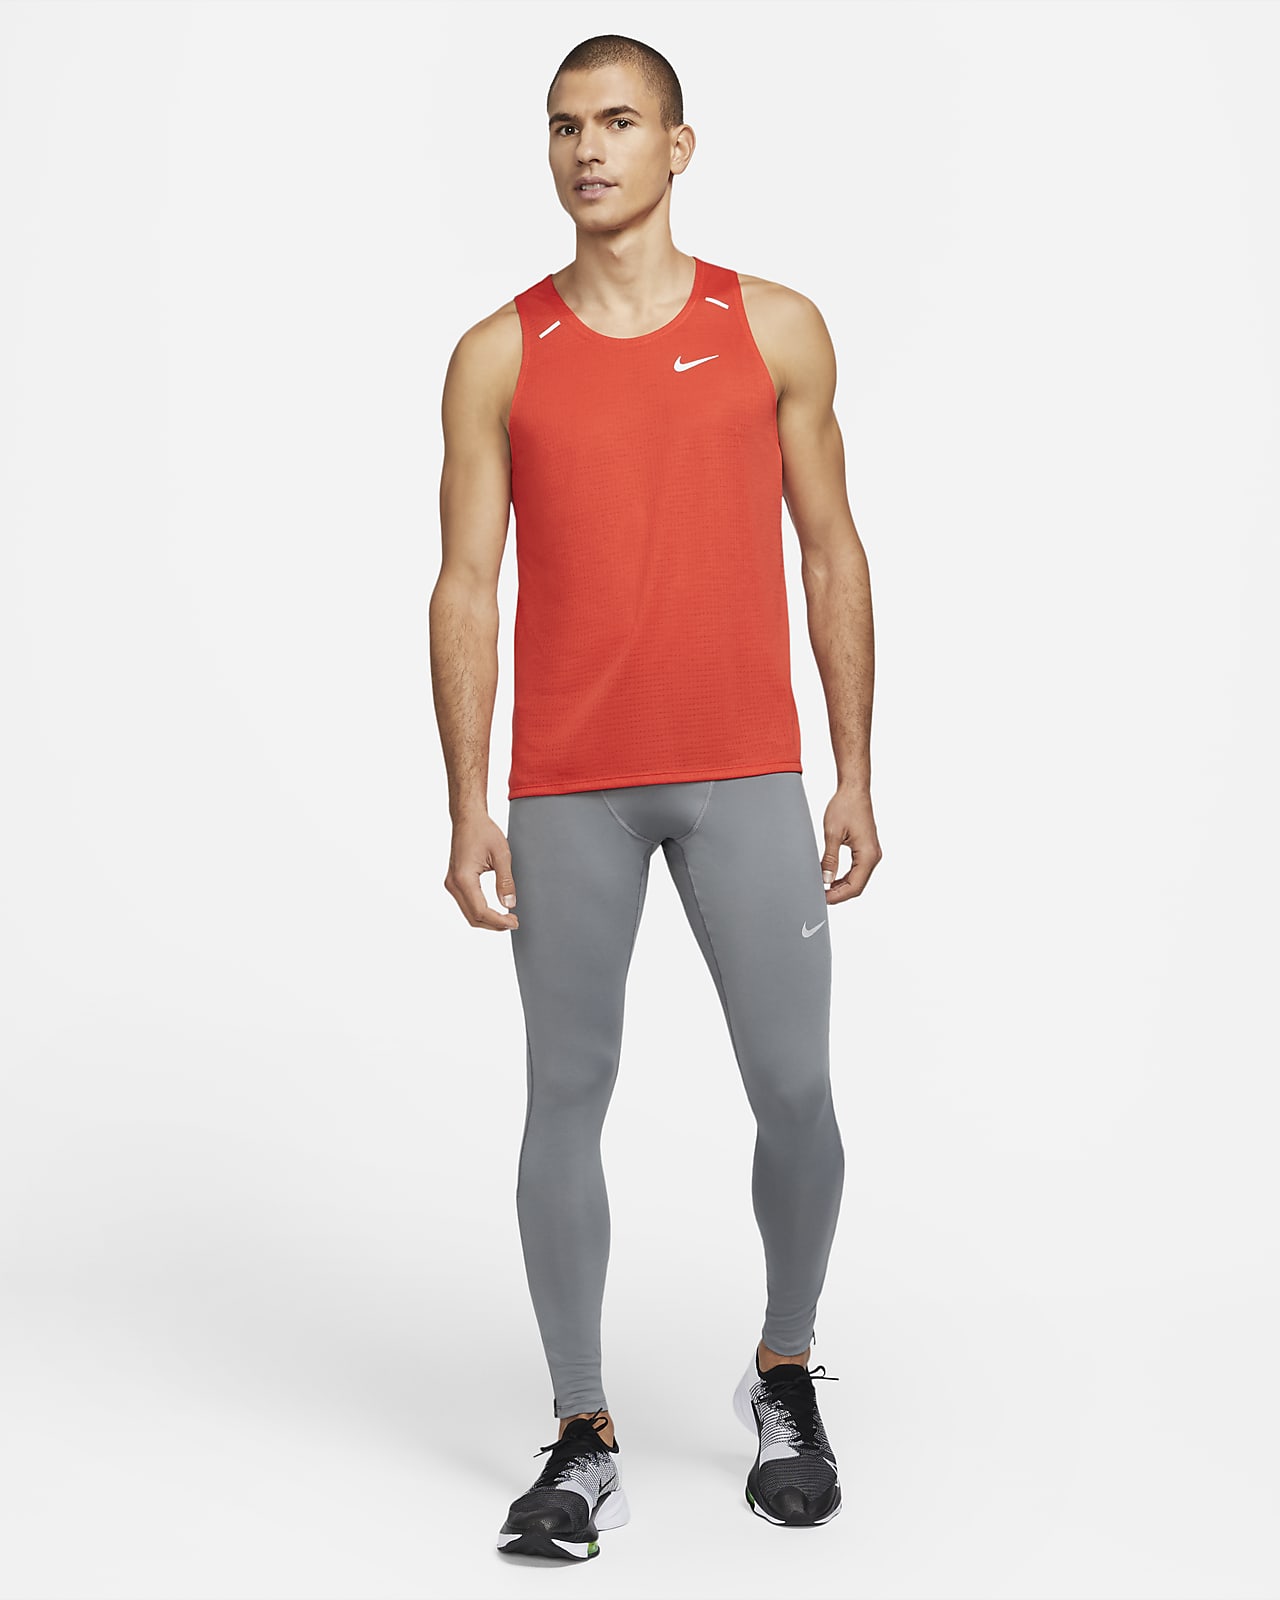 Men's Training & Gym Trousers & Tights. Nike IN